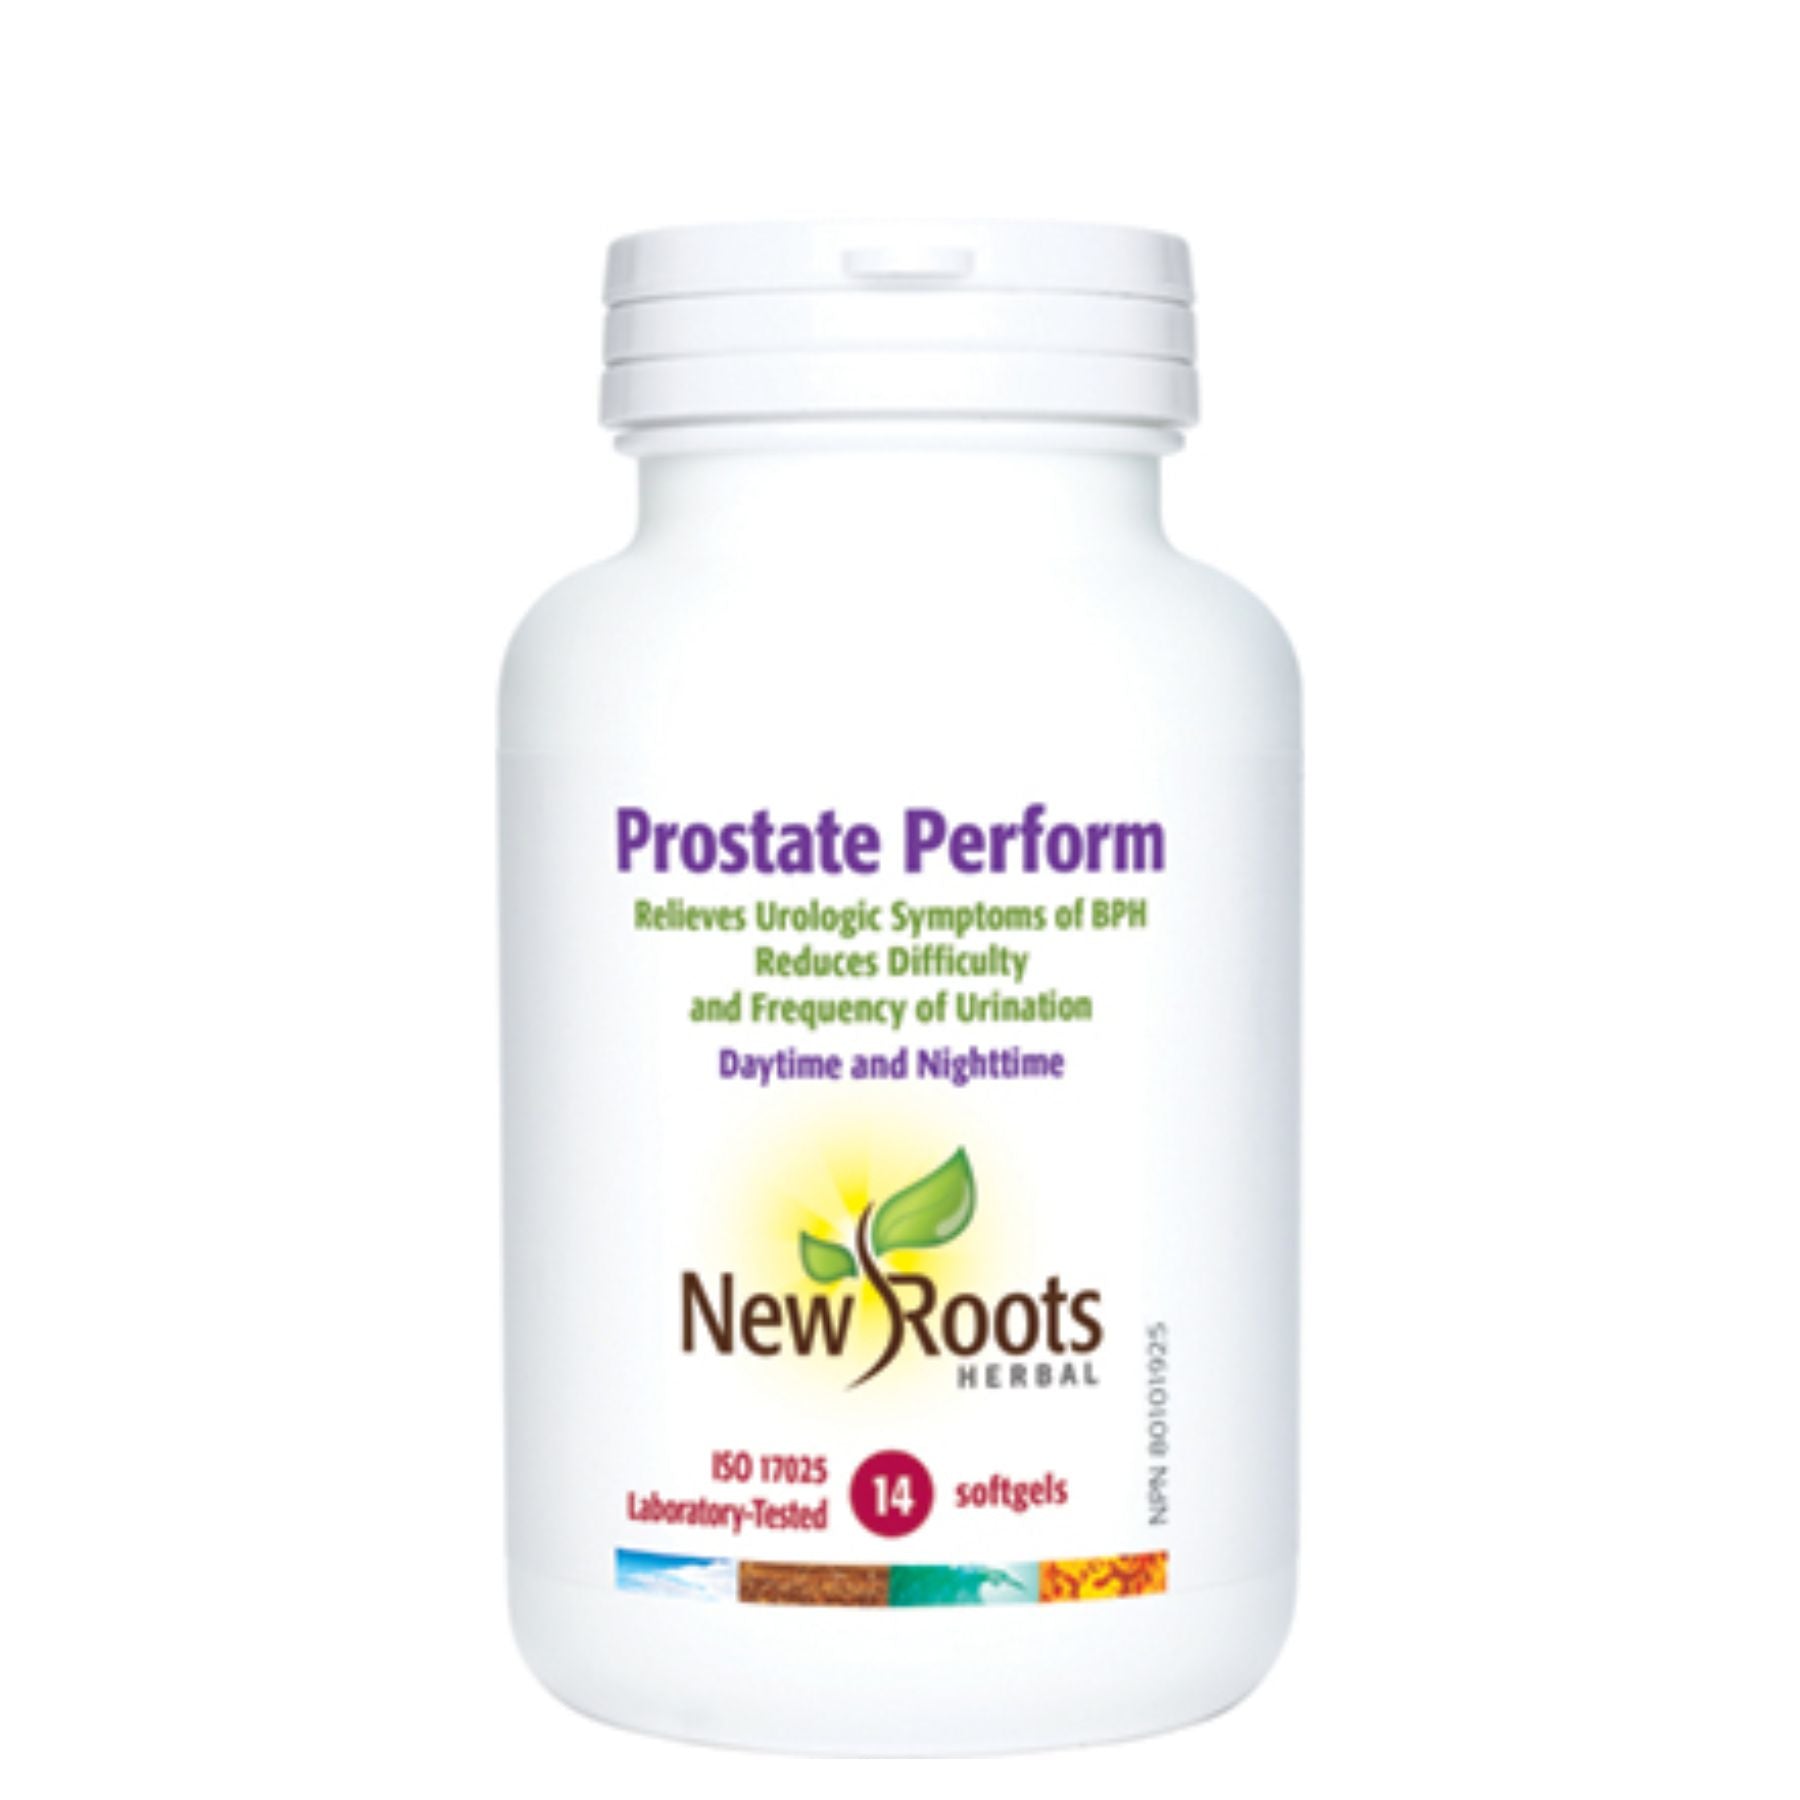 Bottle of New Roots Prostate Perform Travel size - 14 softgels per bottle. Relieves urological symptoms of BPH - Reduces difficulty & frequency of urination. Daytime & nighttime. 